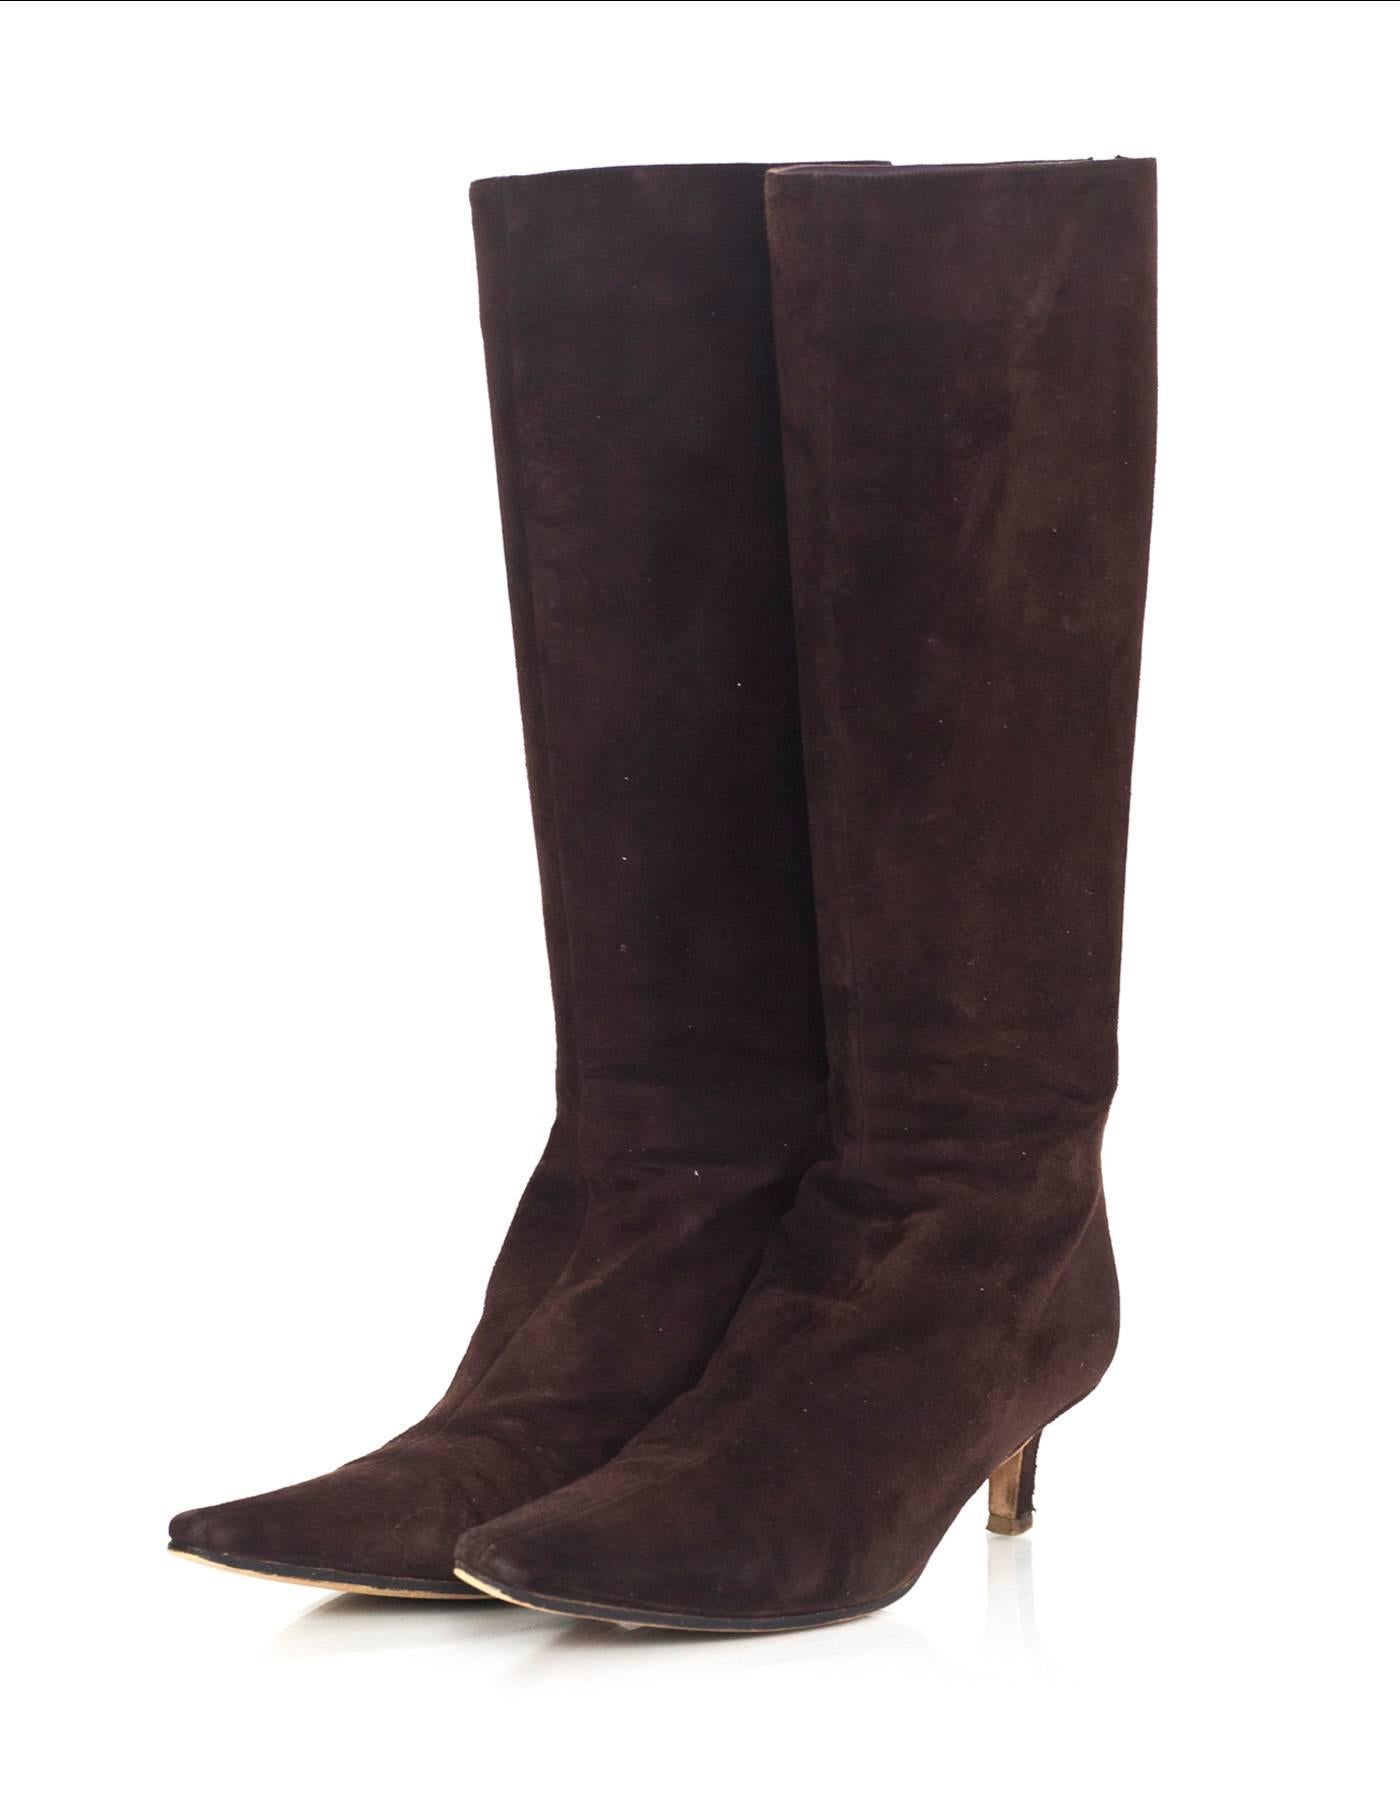 Jimmy Choo Brown Suede Kitten Heel Boots Sz 38

Made In: Italy
Color: Brown
Materials: Suede
Closure/Opening: Zip closure at back
Sole Stamp: Made in Italy 38 (partially covered from being re-soled)
Overall Condition: Very good pre-owned condition